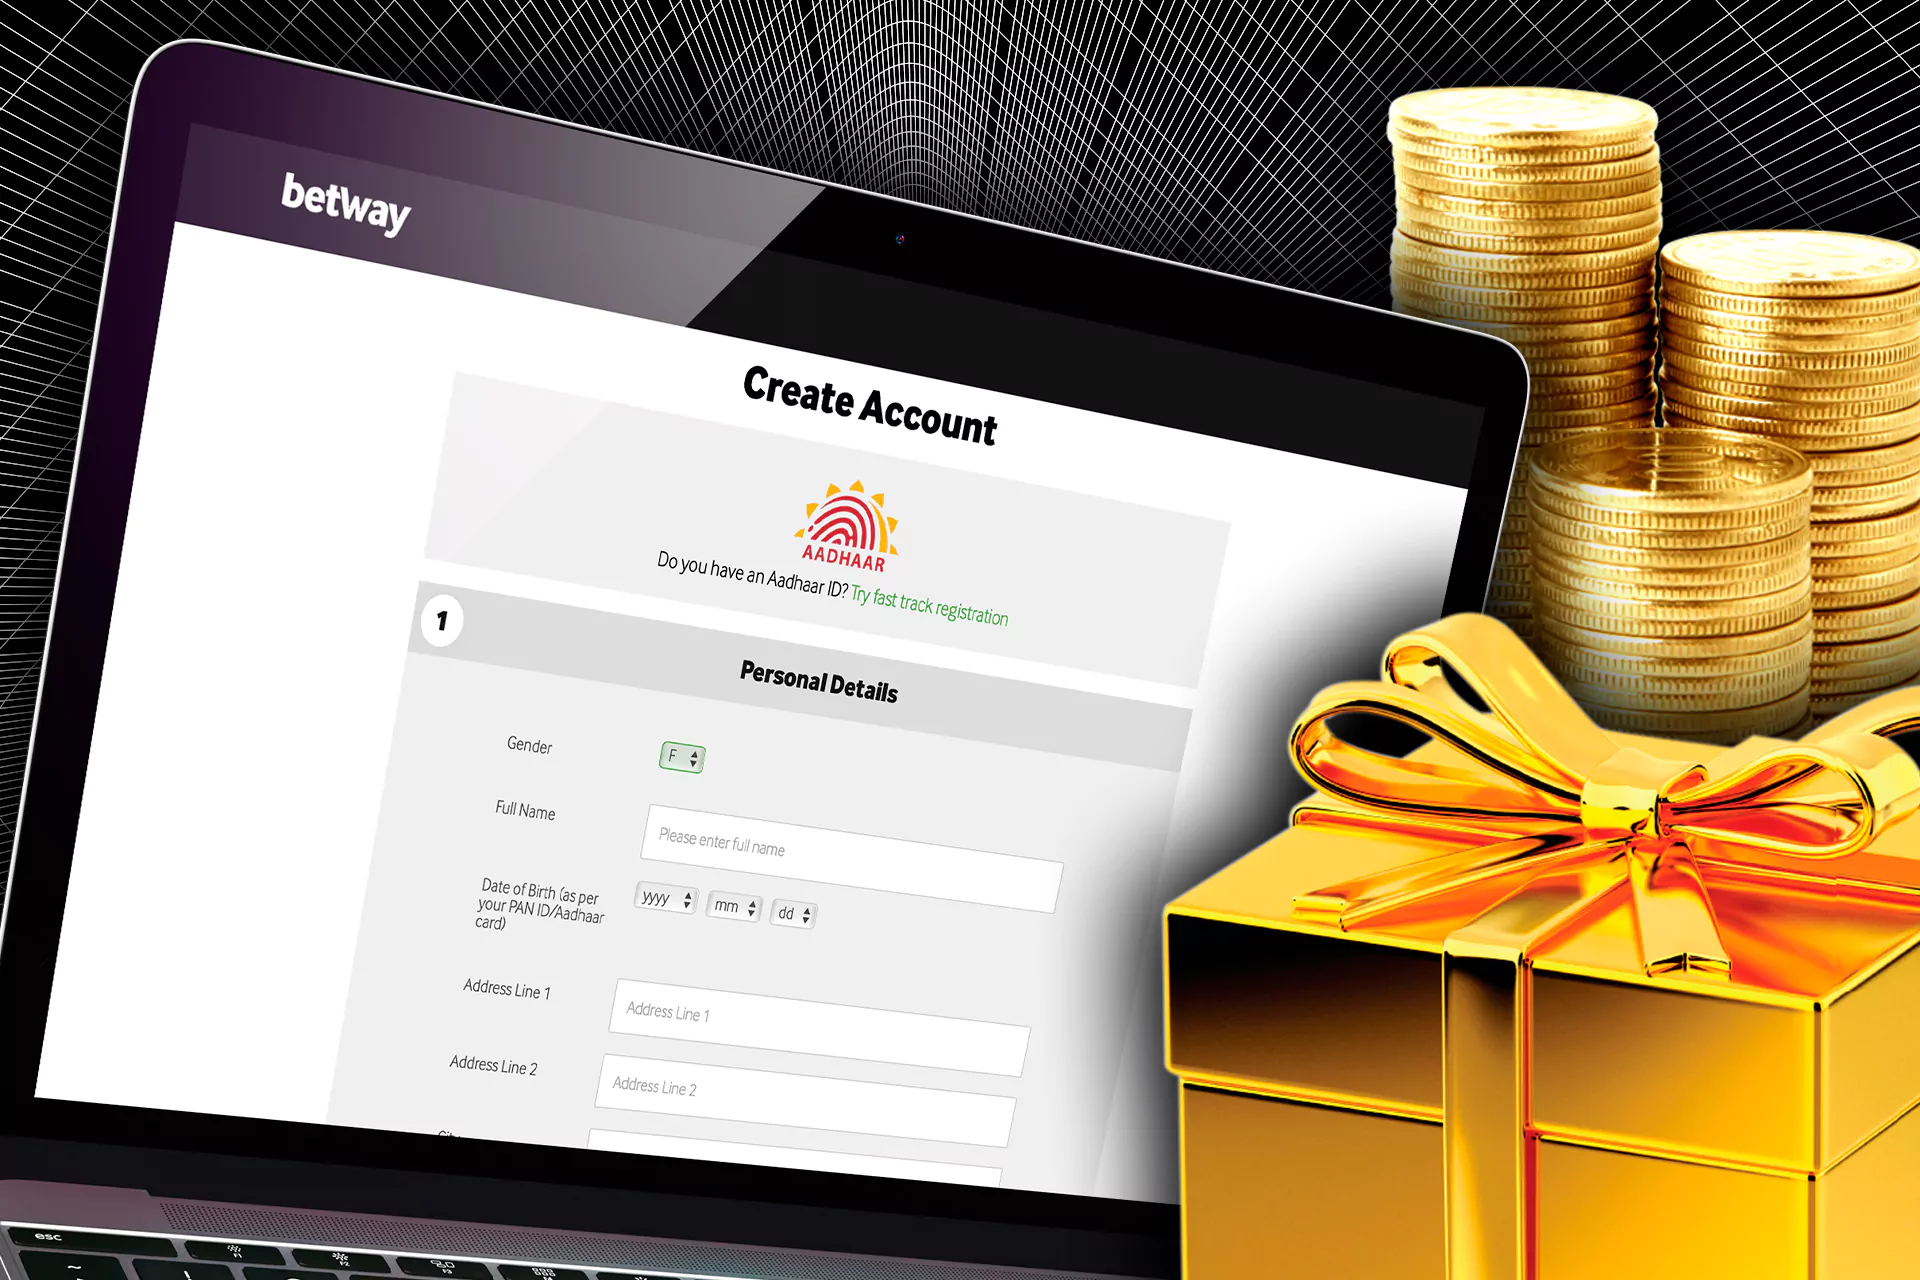 To get the welcome bonus from Betway, you should create an account and accept the bonus program terms and conditions.